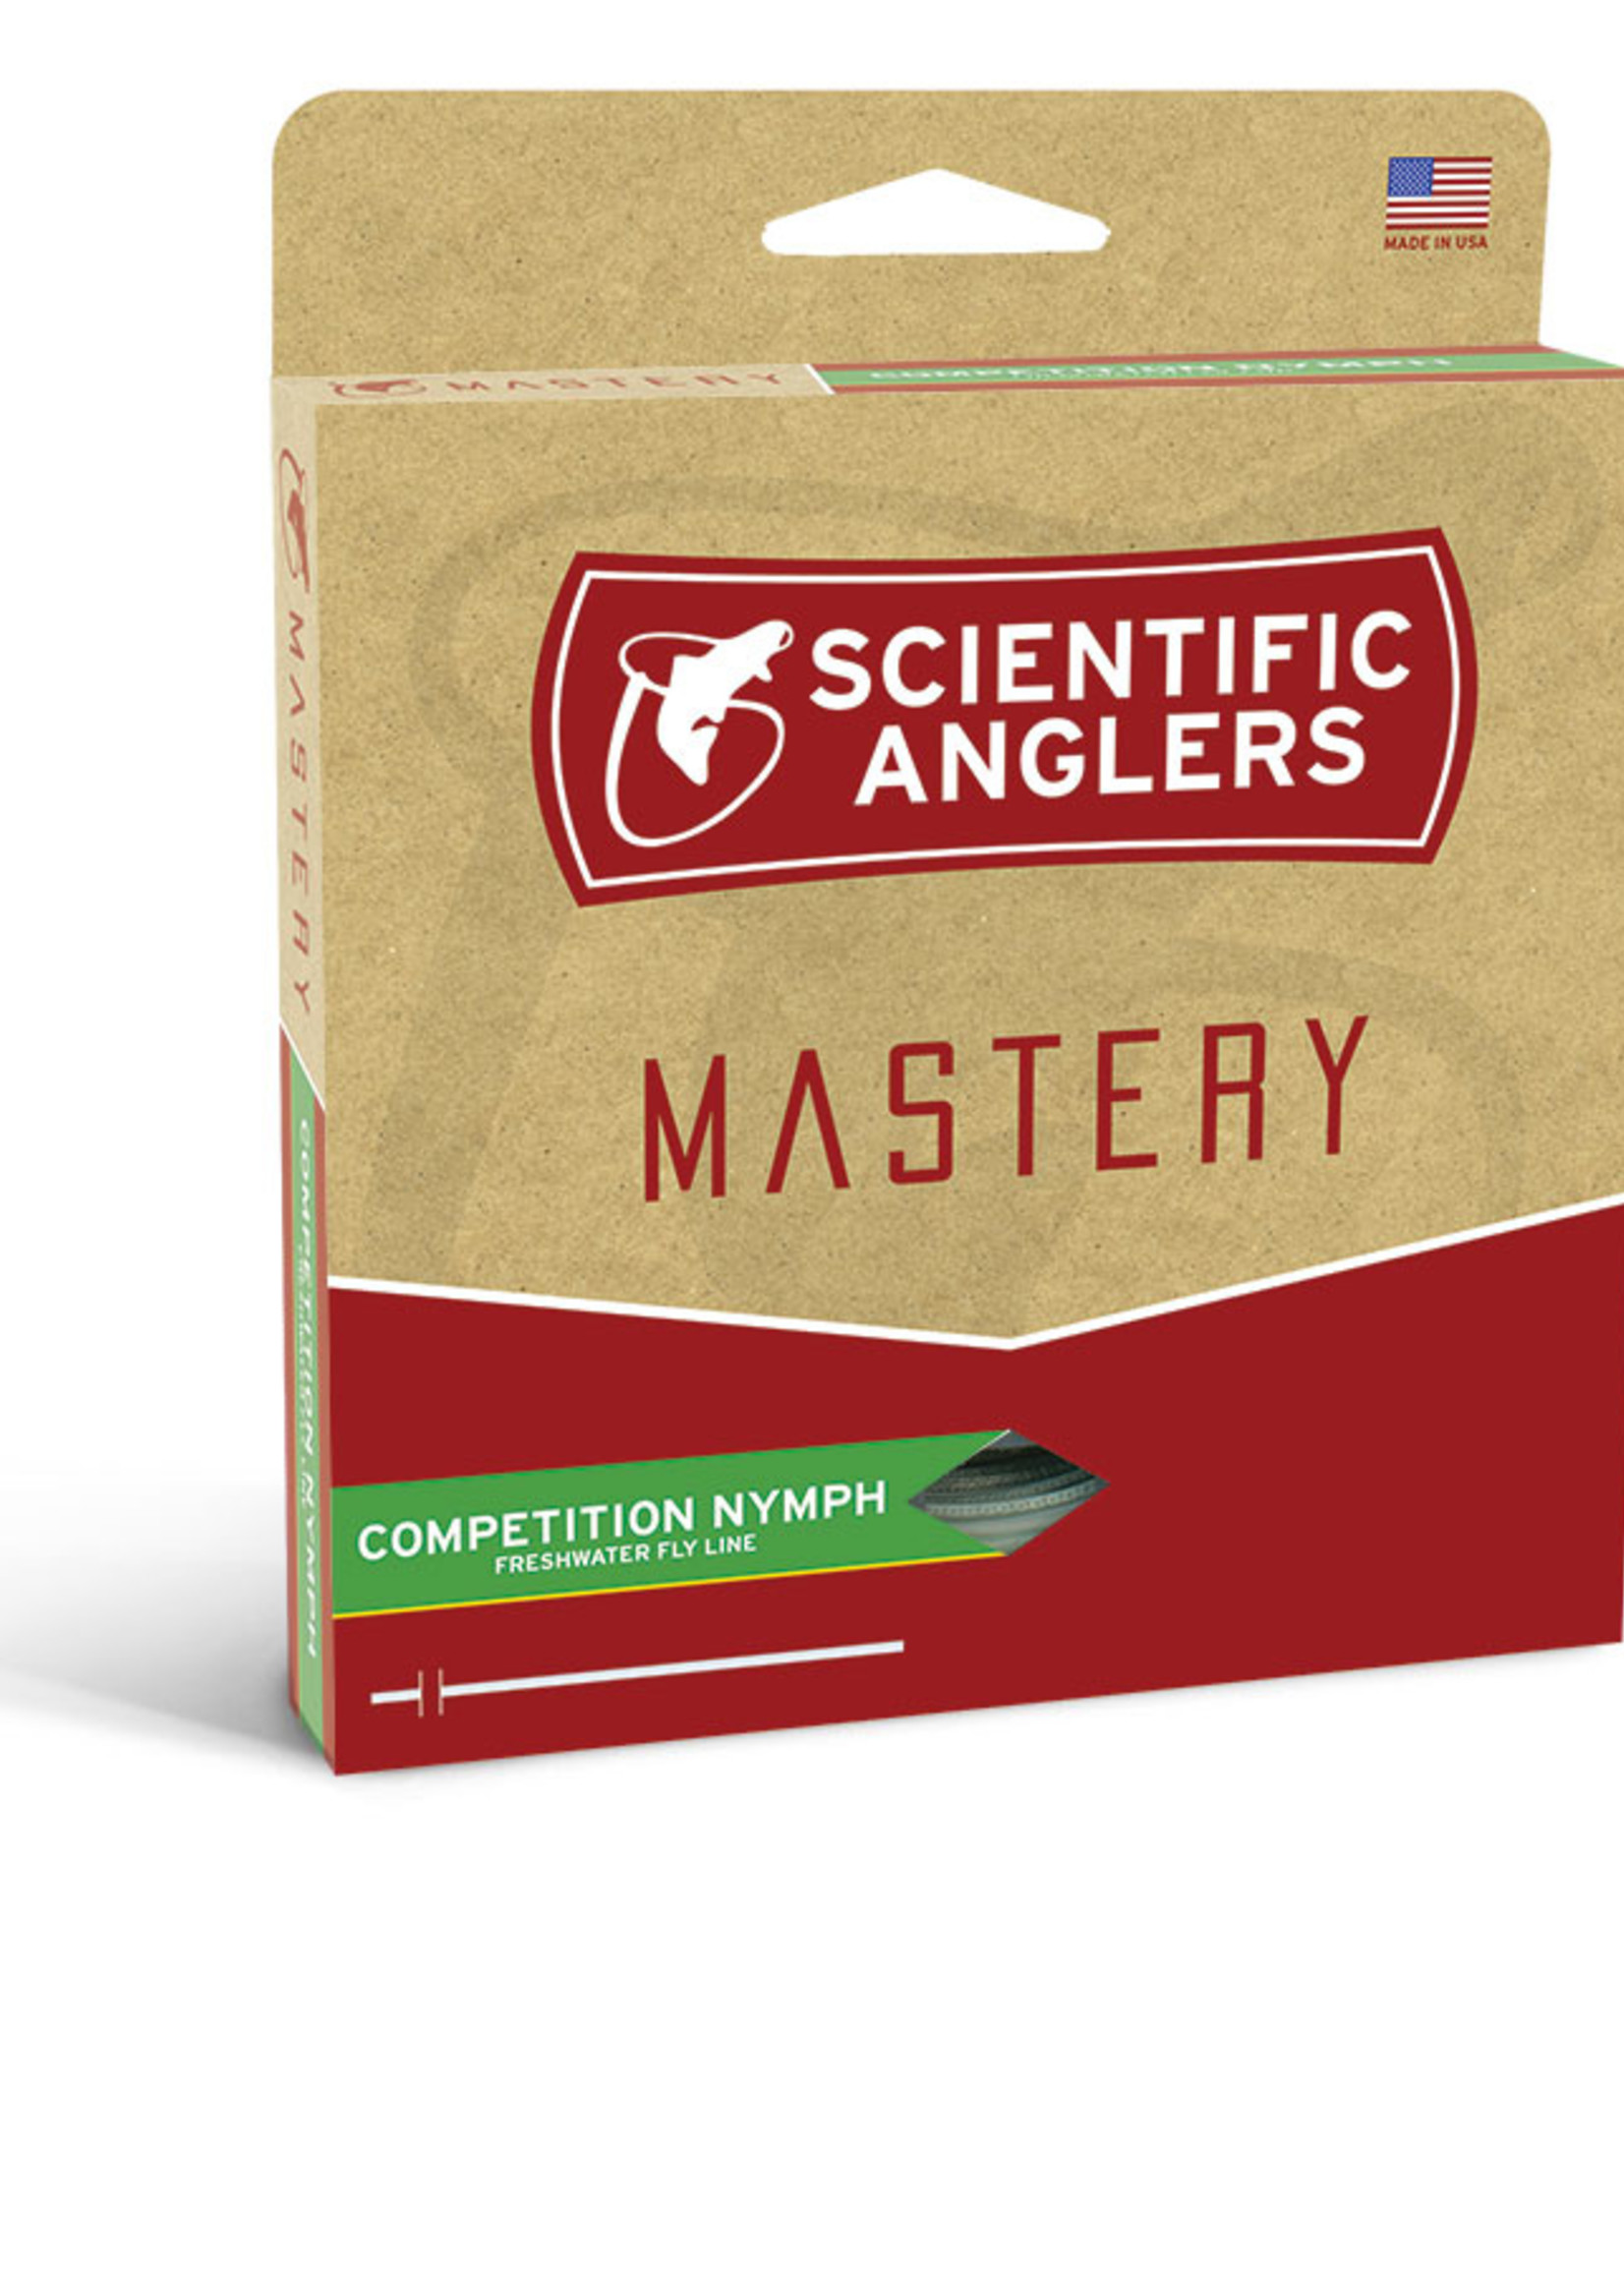 Scientific Anglers SA Competition Nymph Mastery Fly Line